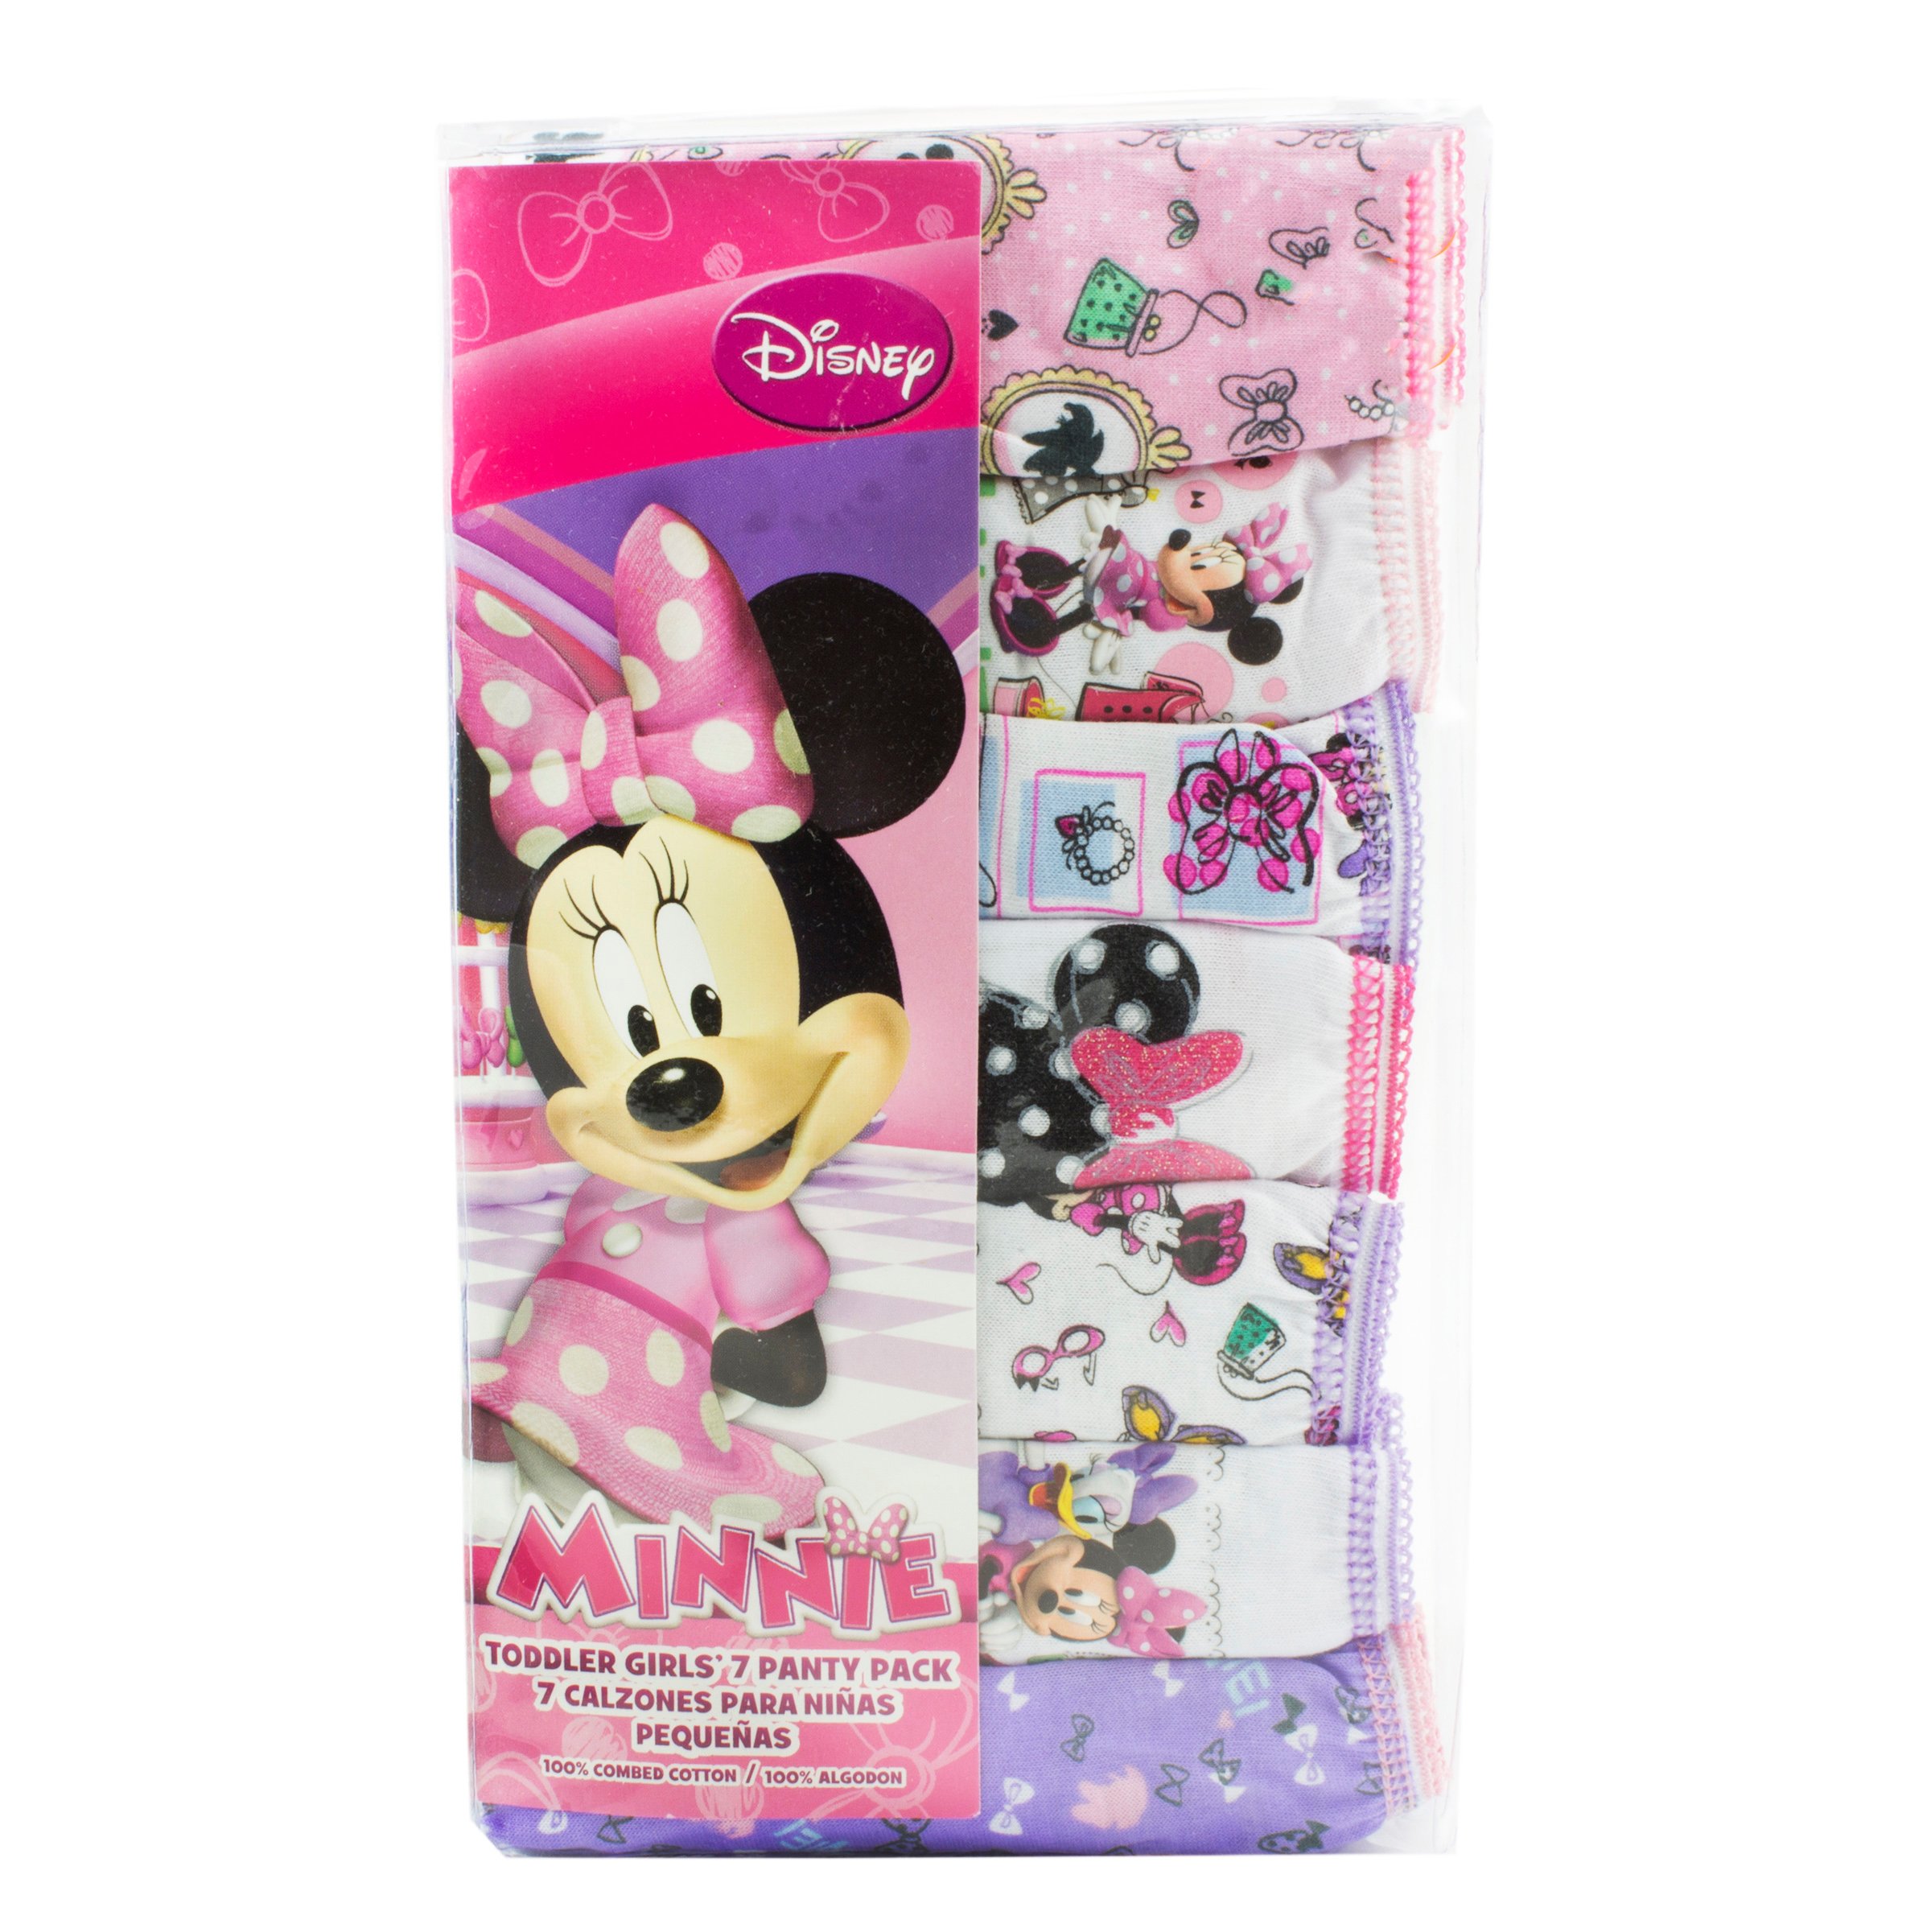 Handcraft Disney Mickey Mouse Clubhouse Toddler Boys' Day of the Week Briefs  - Shop Underwear at H-E-B